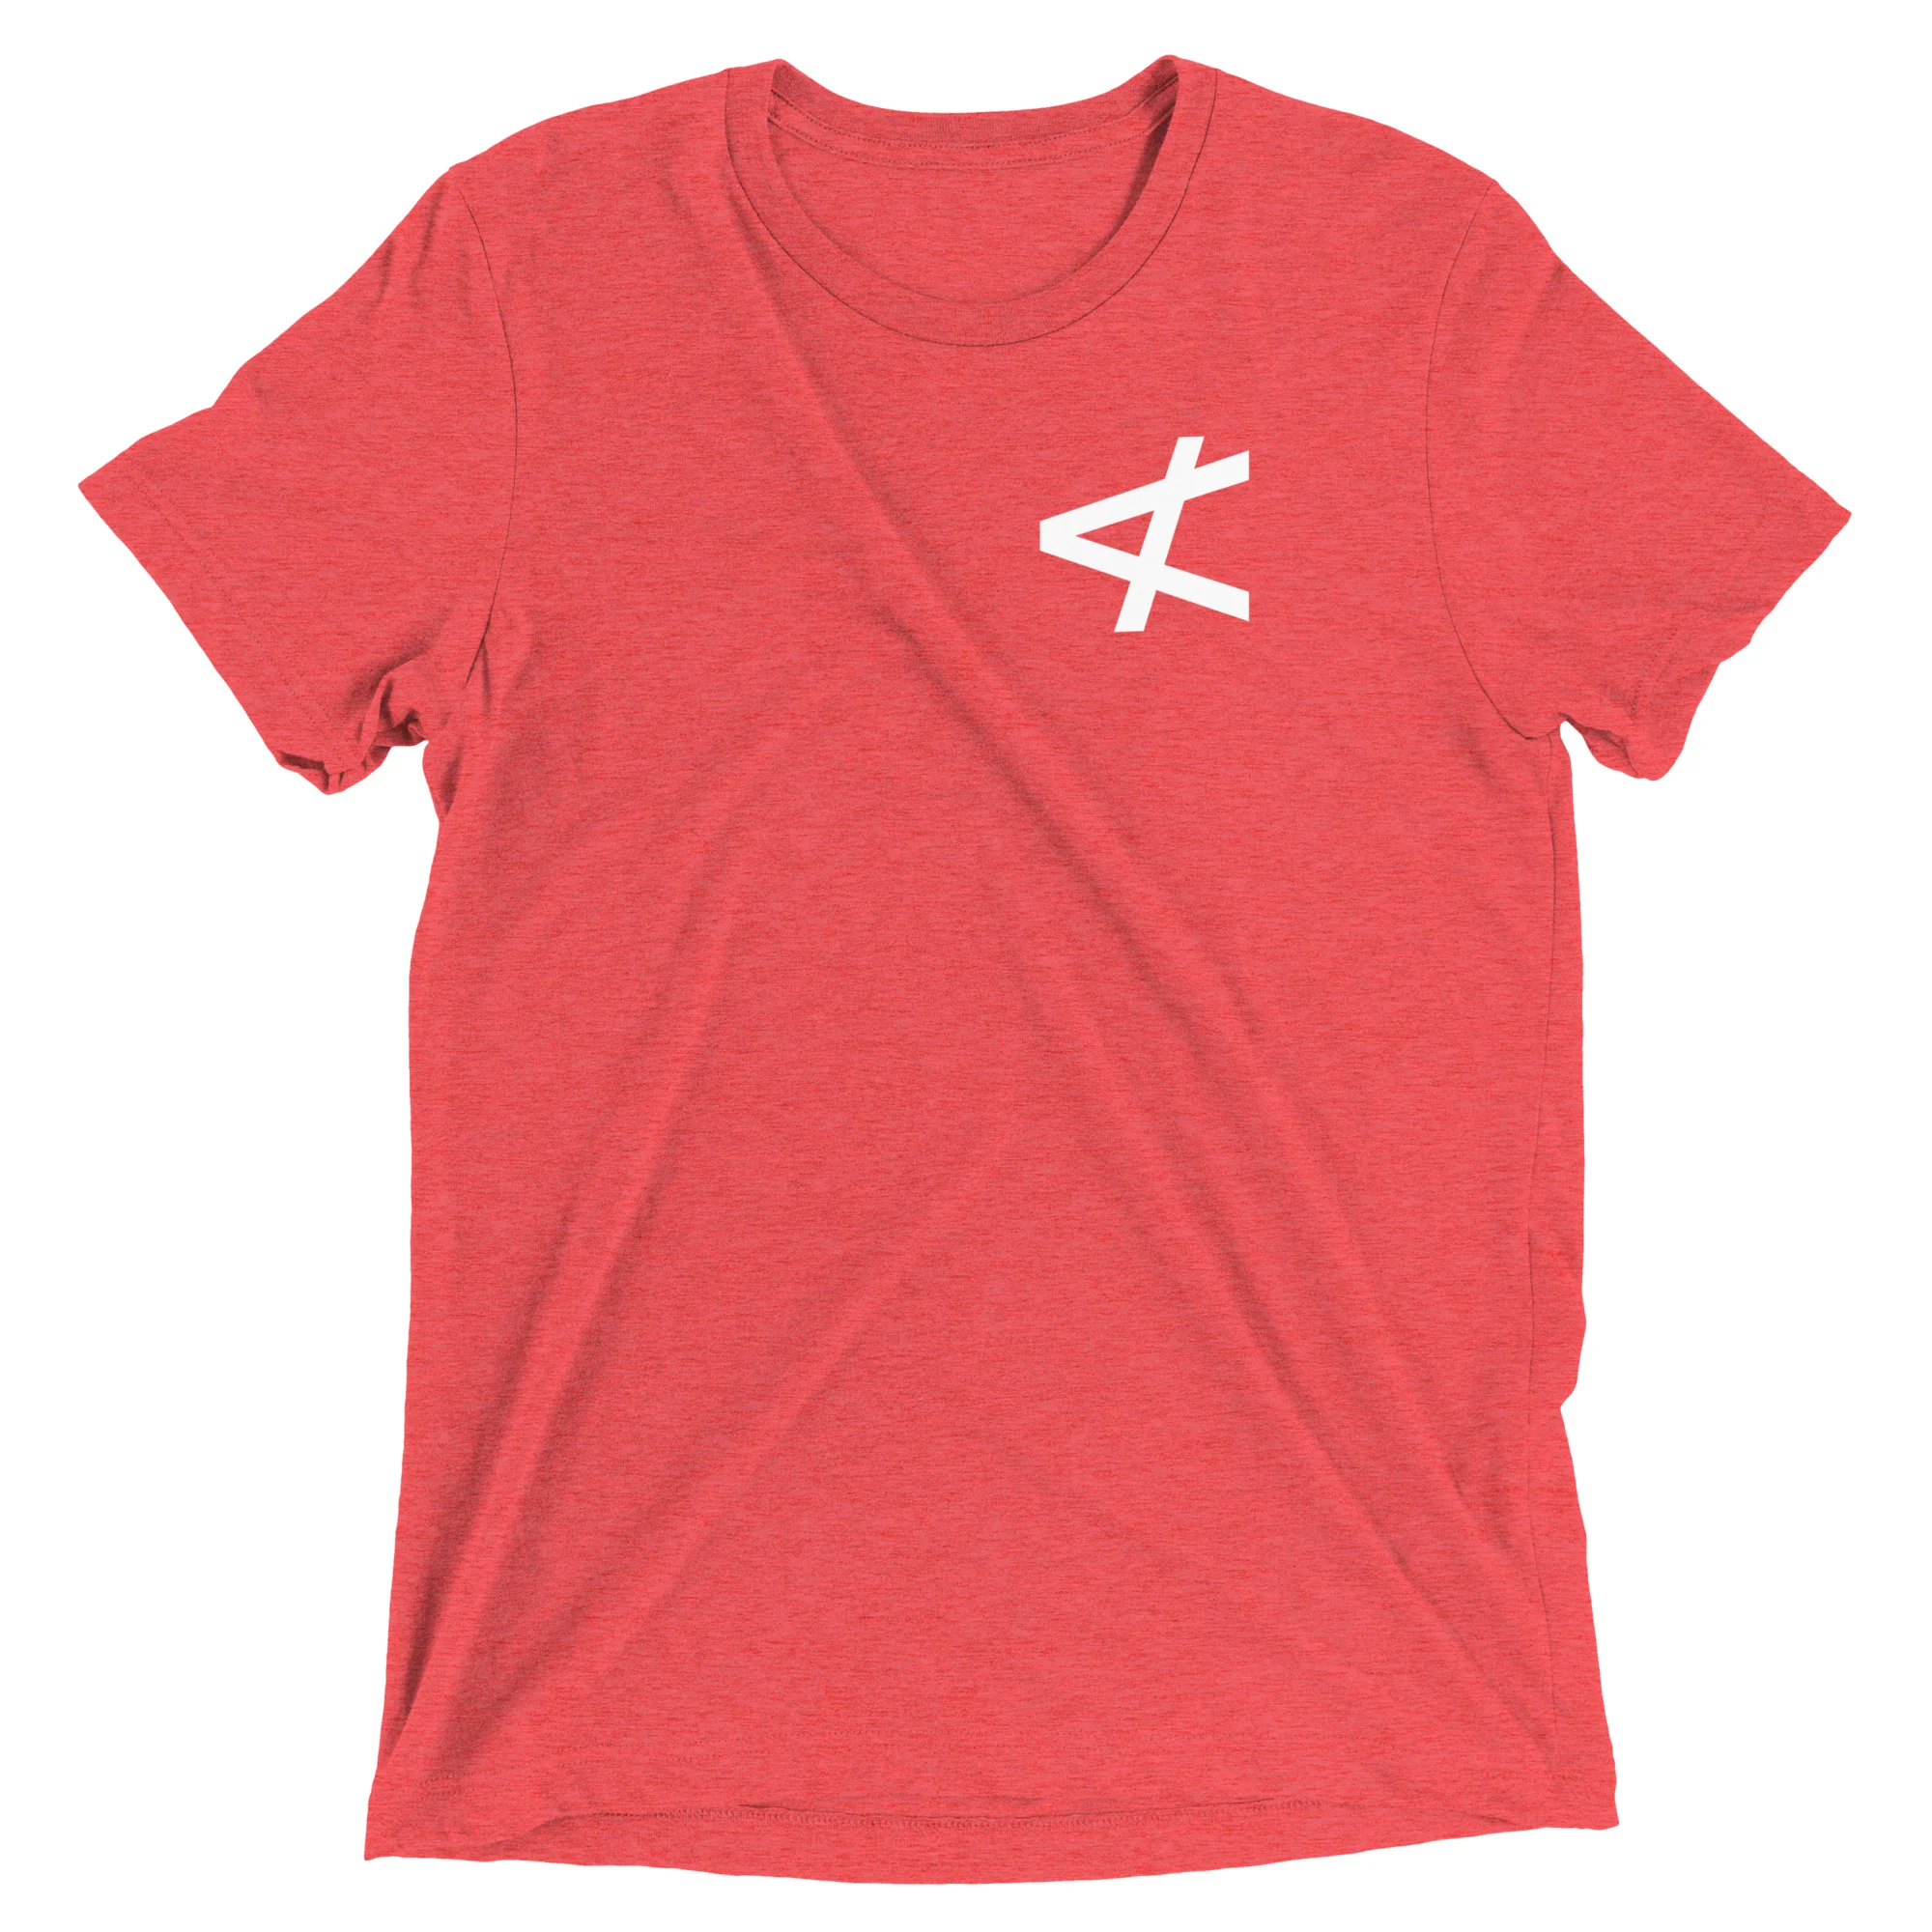 Product image for Not Less Than – Single Color T